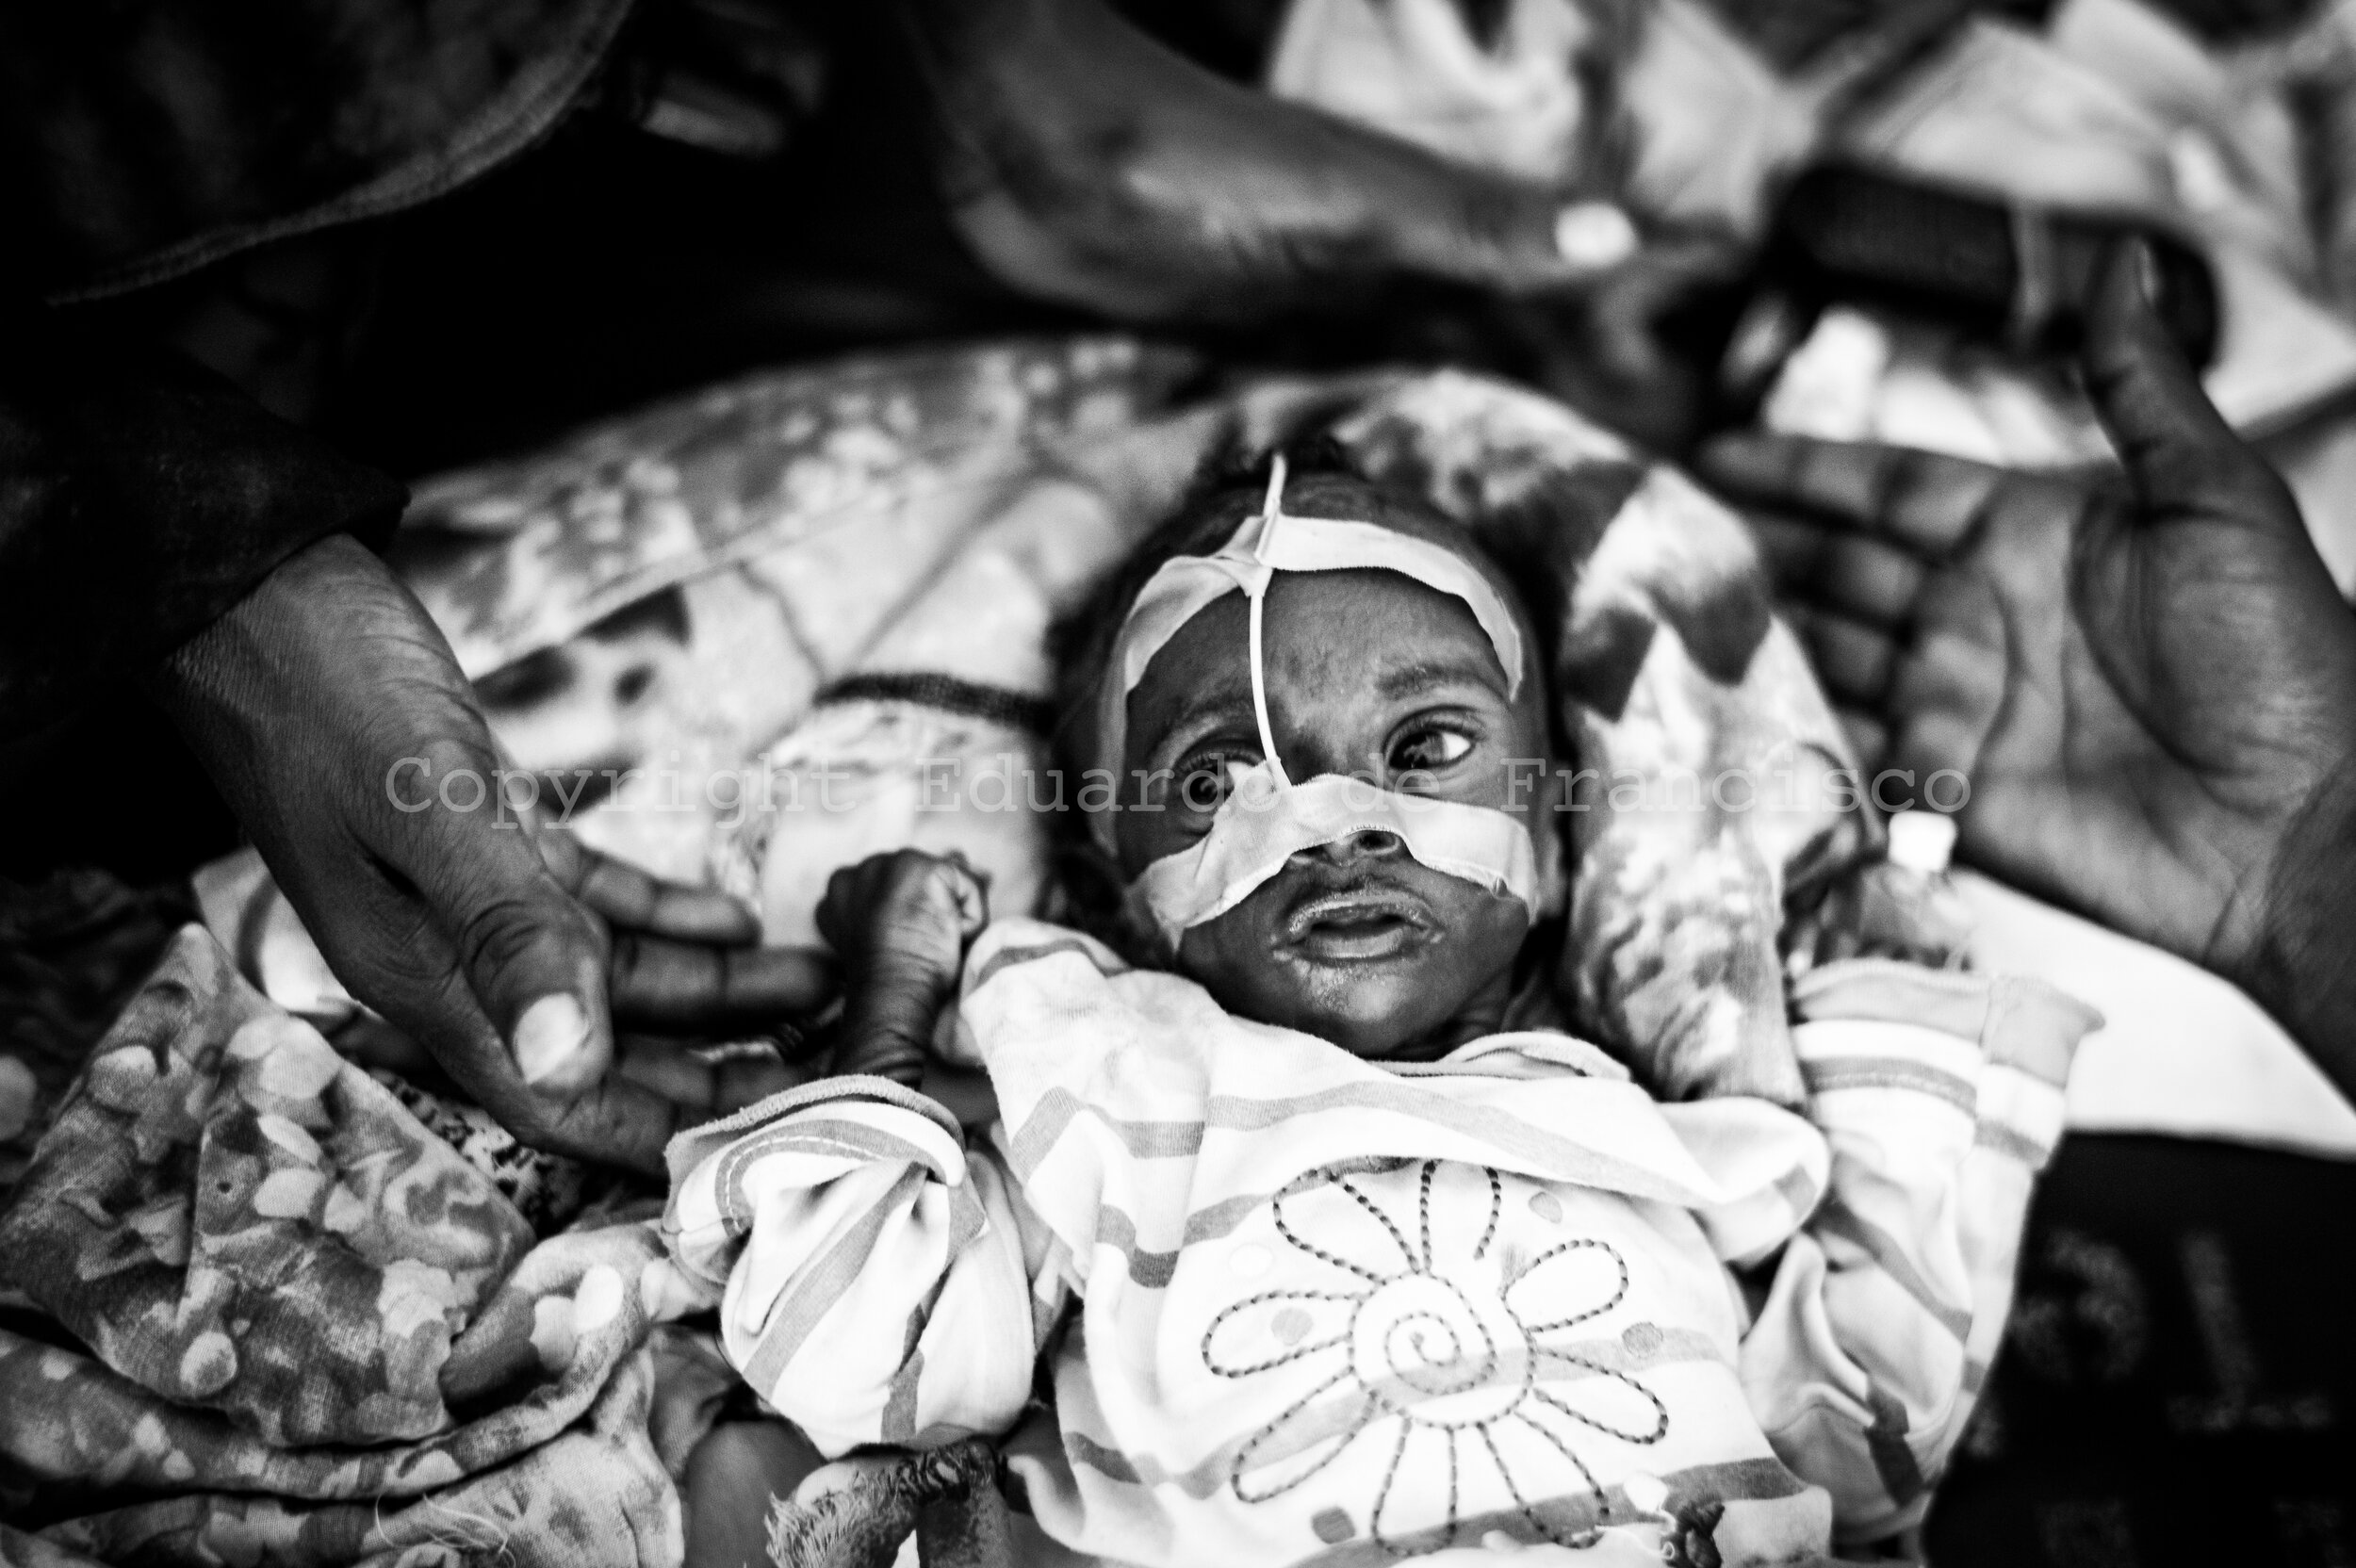  Ifrah Mukhtar, who is three months old and weights 2.3 kg. Born in Afgoye, her mother and grandmother brought her to Mogadishu in order to receive malnutrition treatment. They arrived with nowhere to sleep or money to buy food, so the hospital feeds